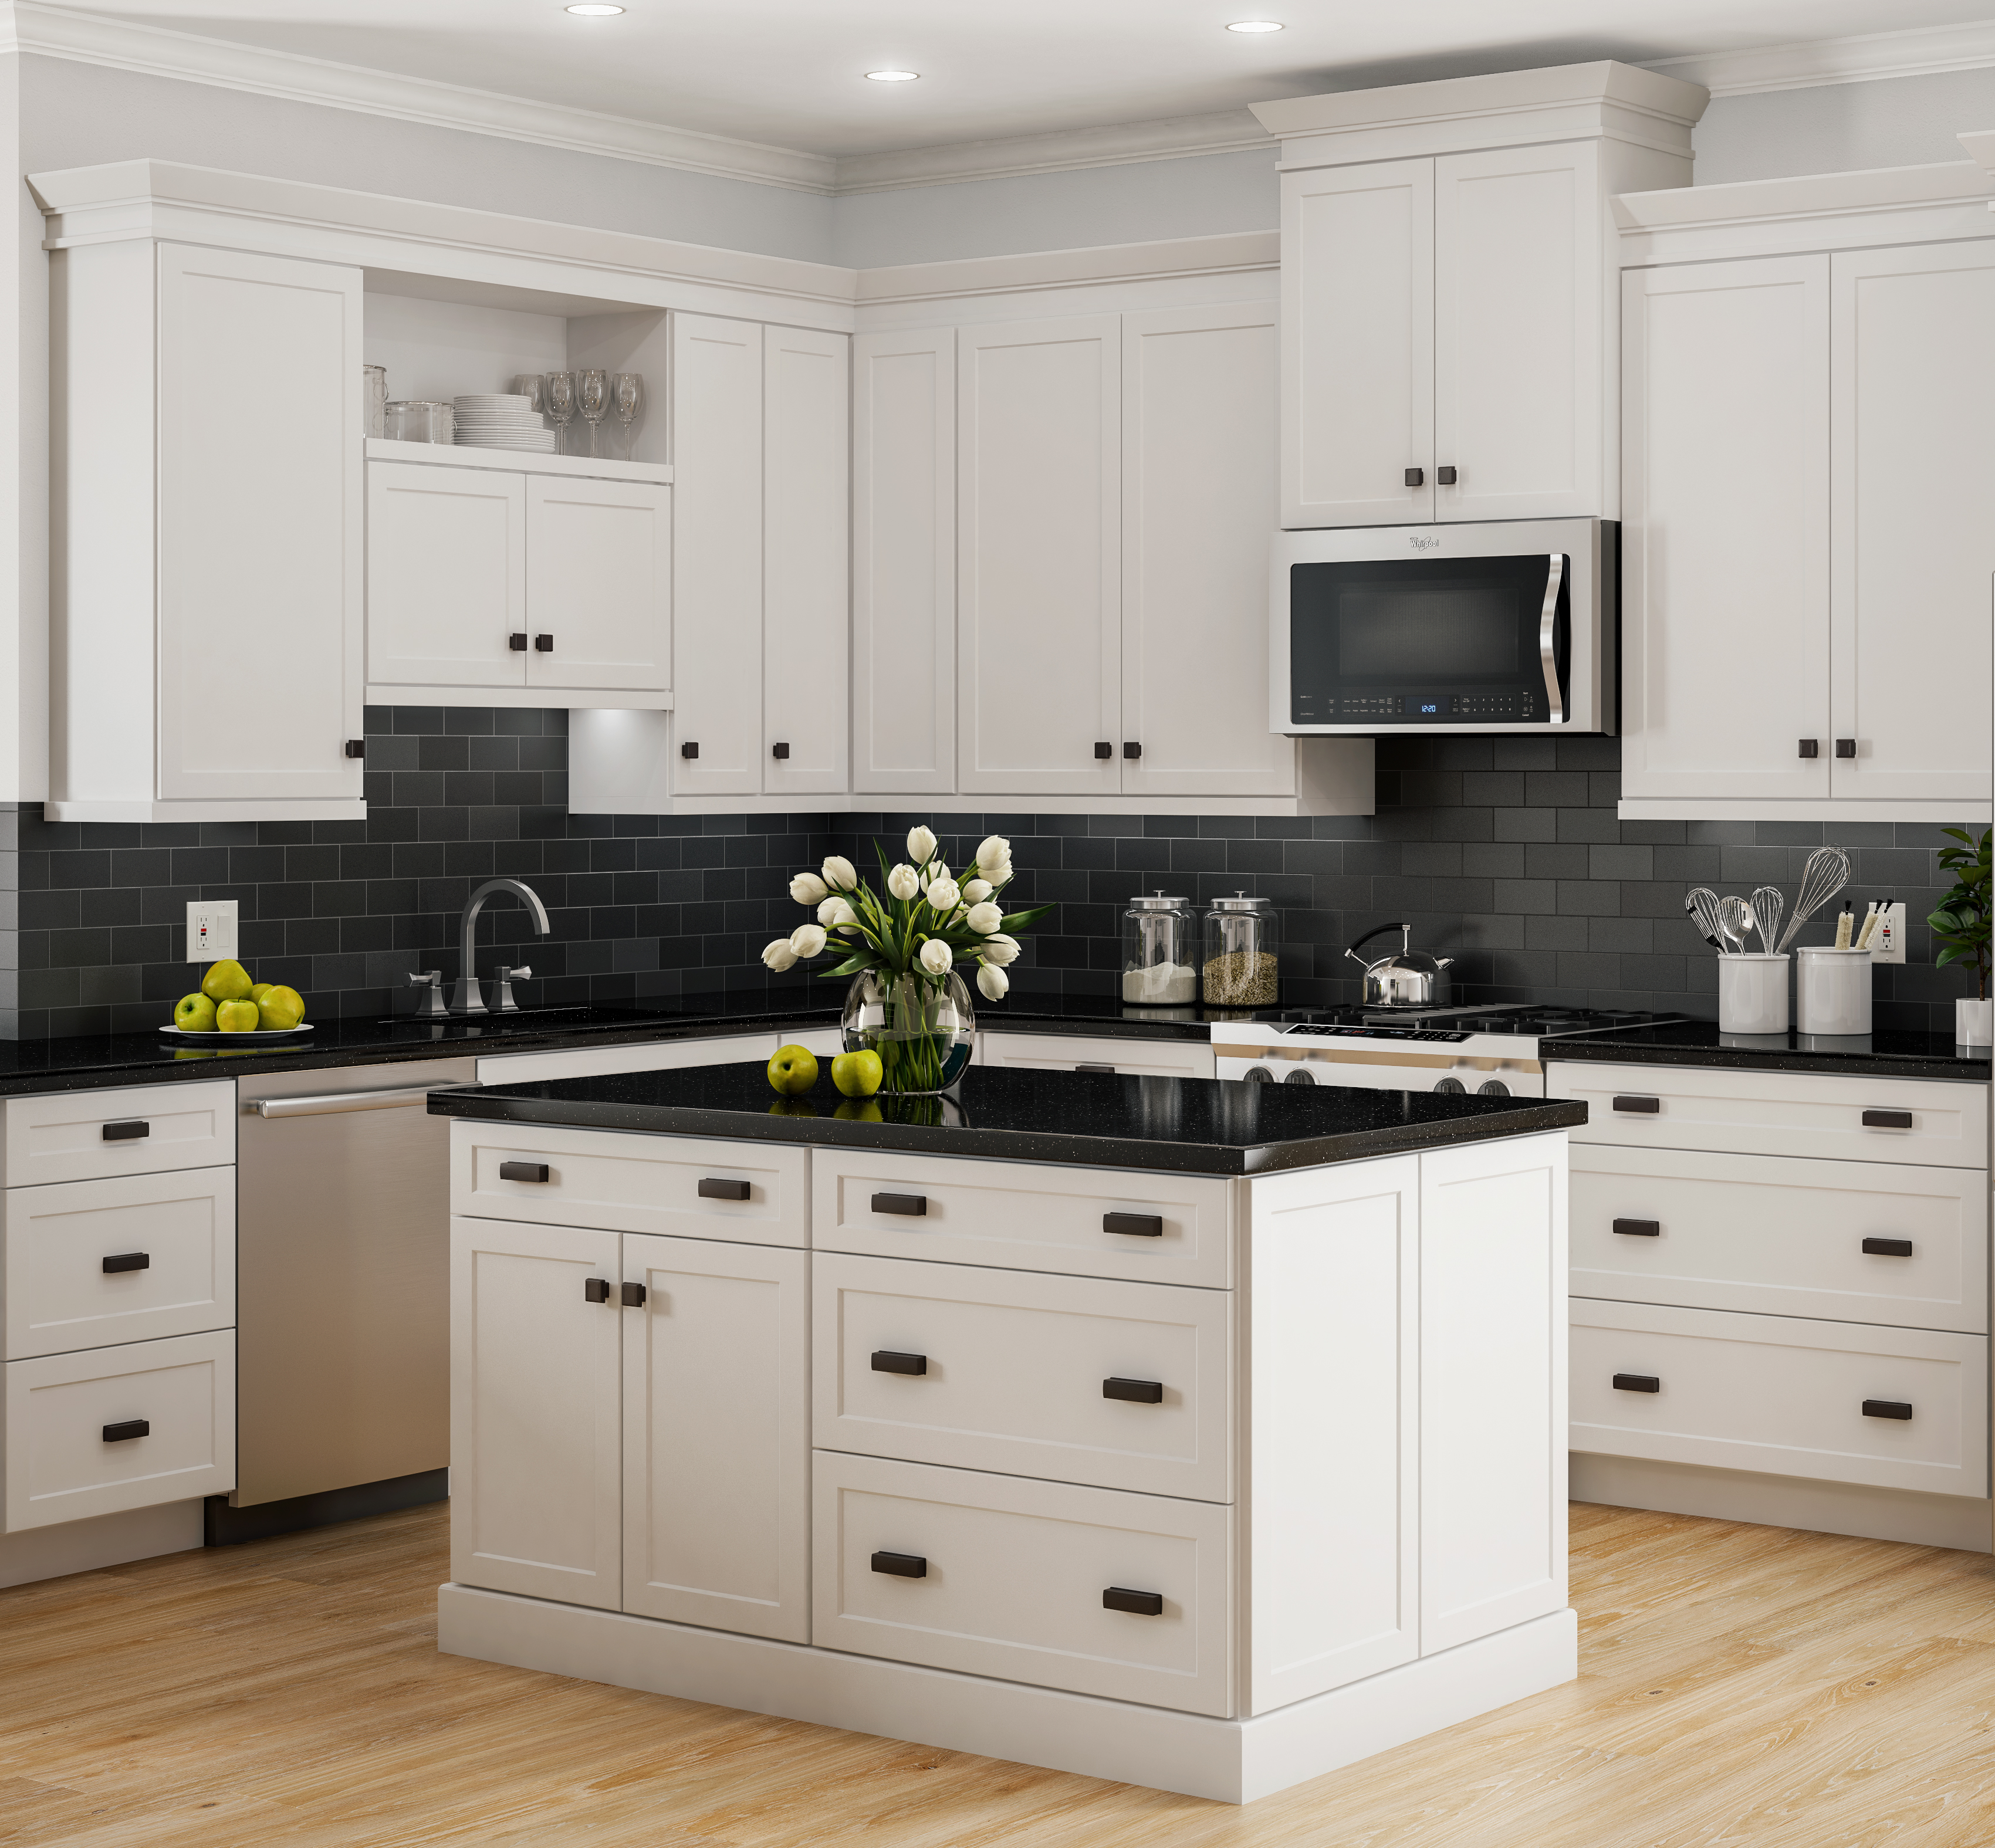 Pcs Professional Cabinet Solutions, White Mission Kitchen Cabinets